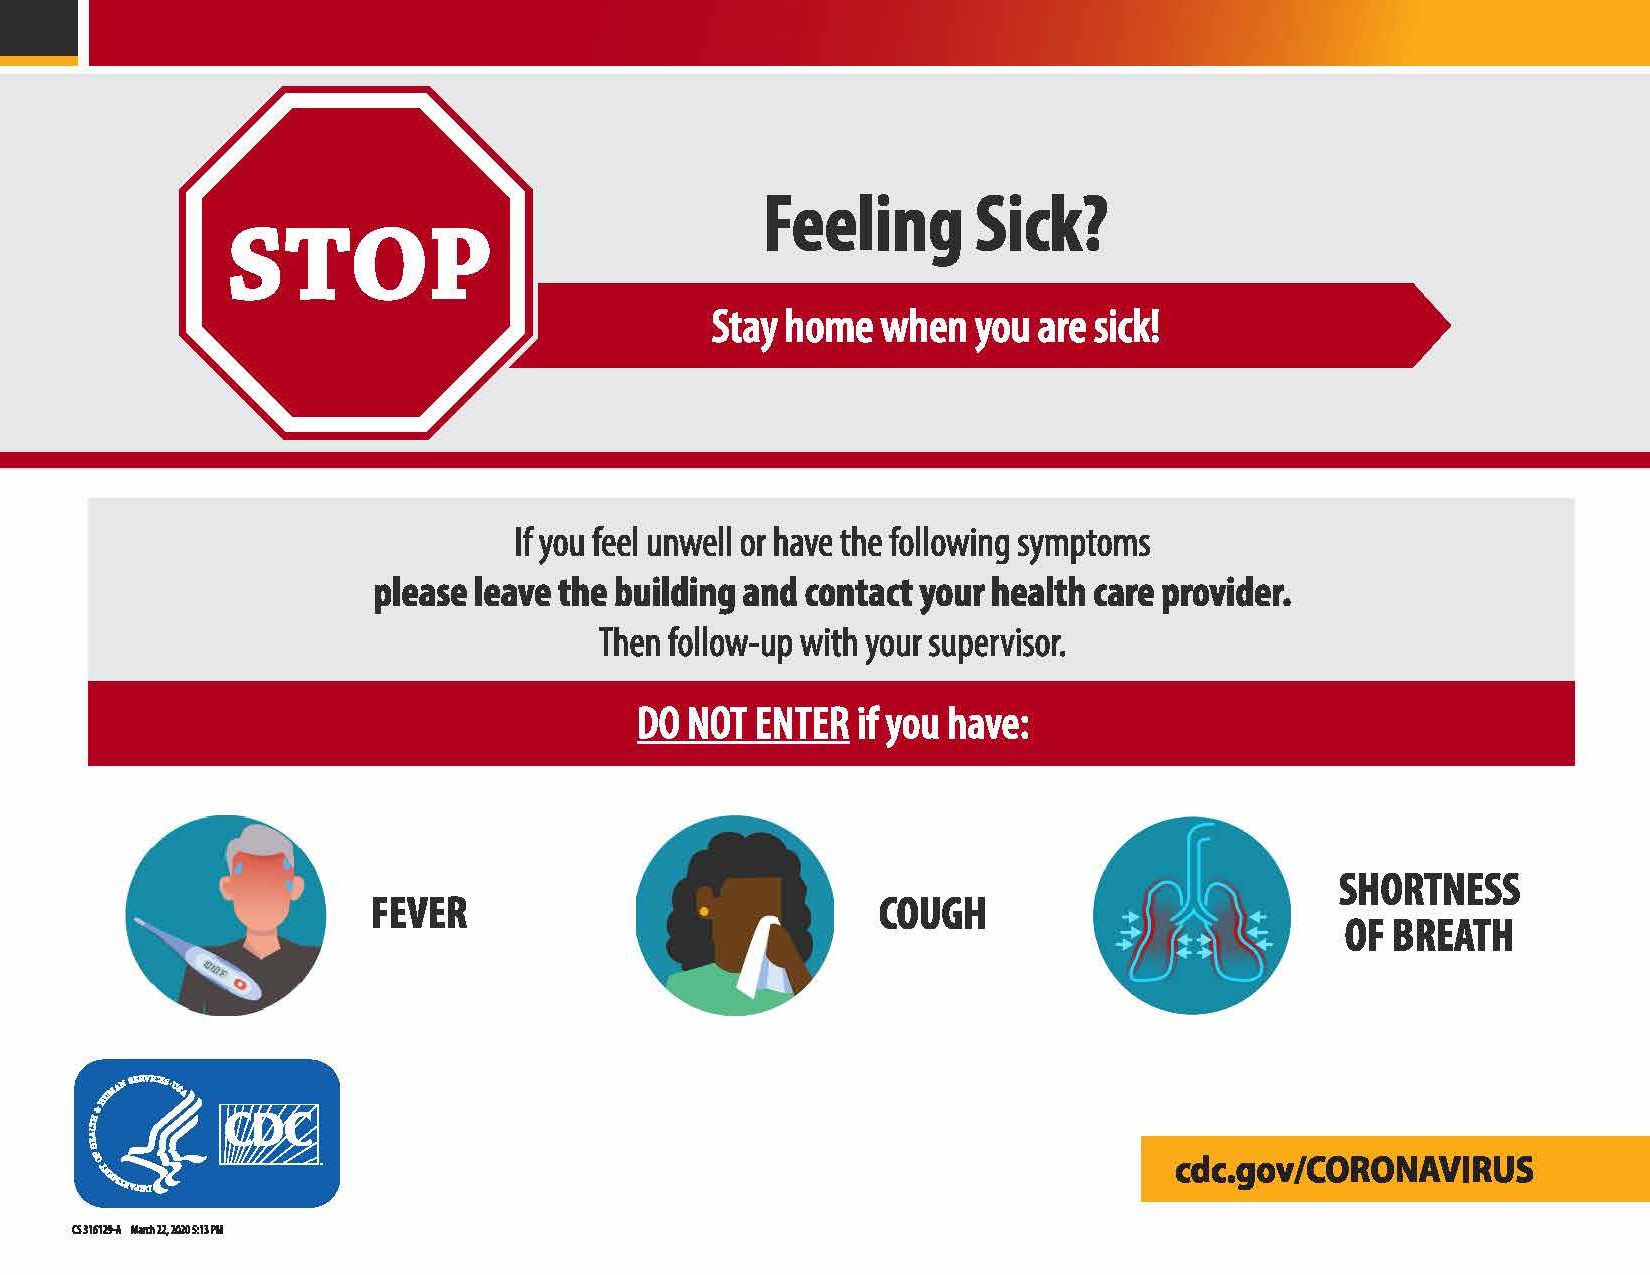 11" x 17" STOP Feeling Sick? Poster on Wet Strength 12 mil Paper Laminated